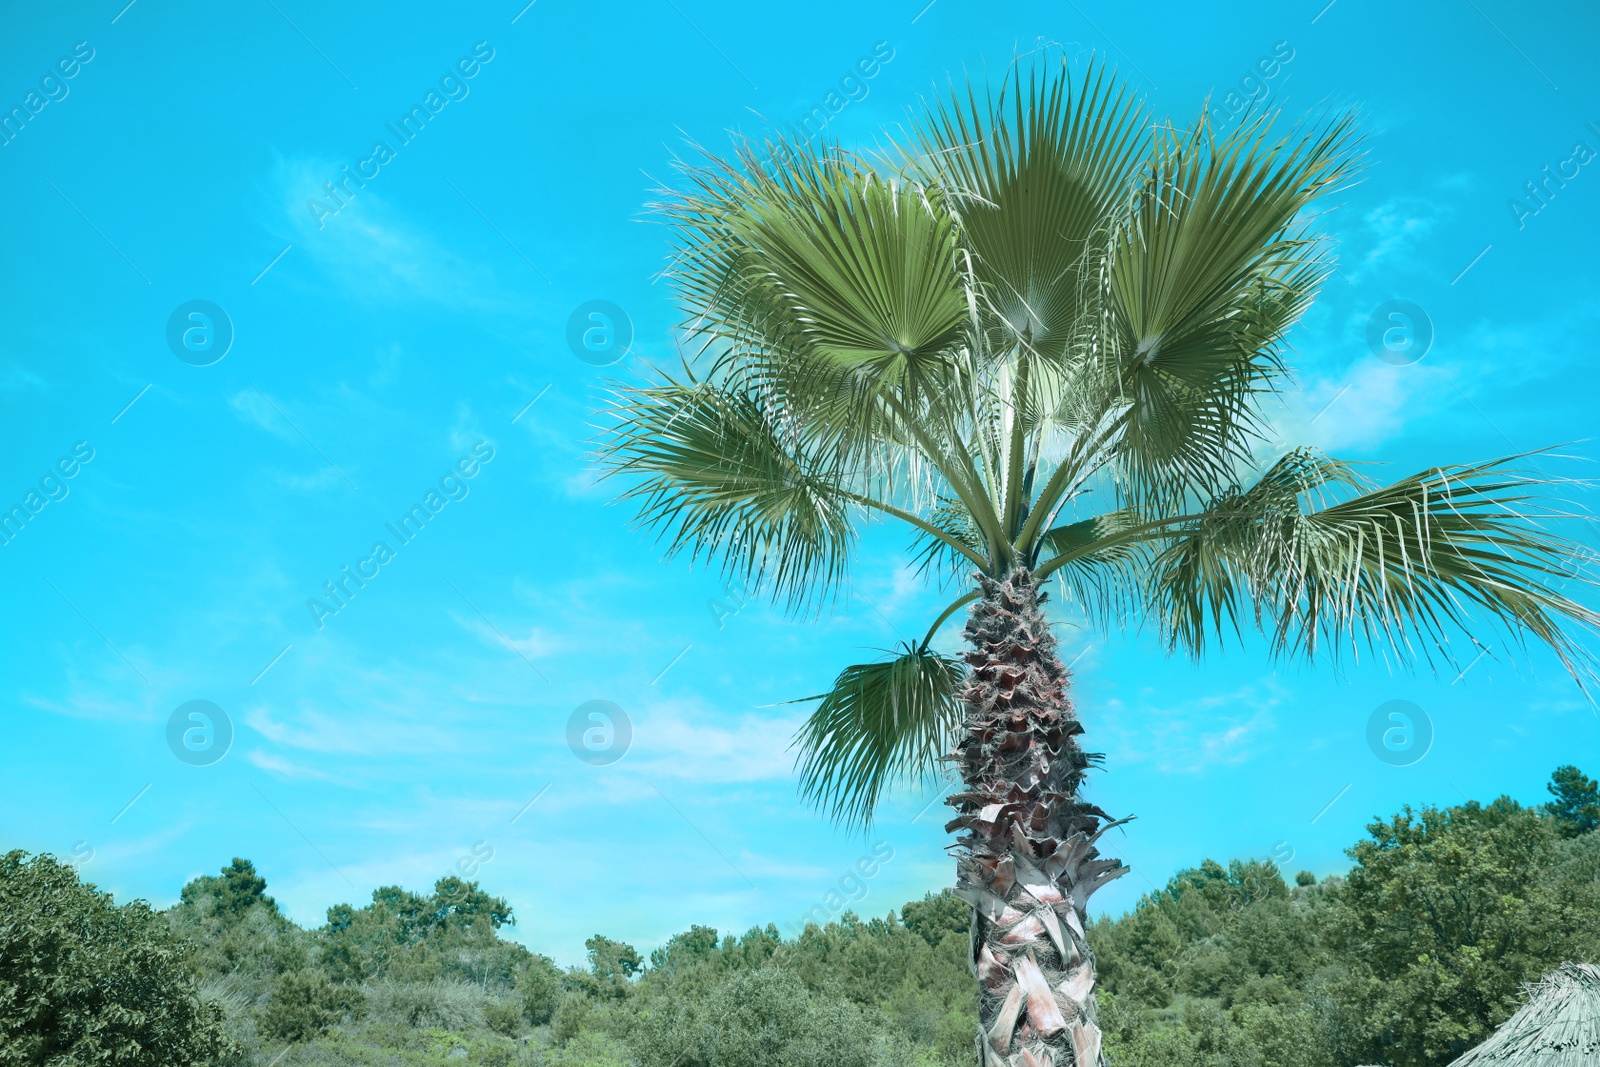 Image of Beautiful view of palm tree outdoors on sunny summer day. Stylized color toning